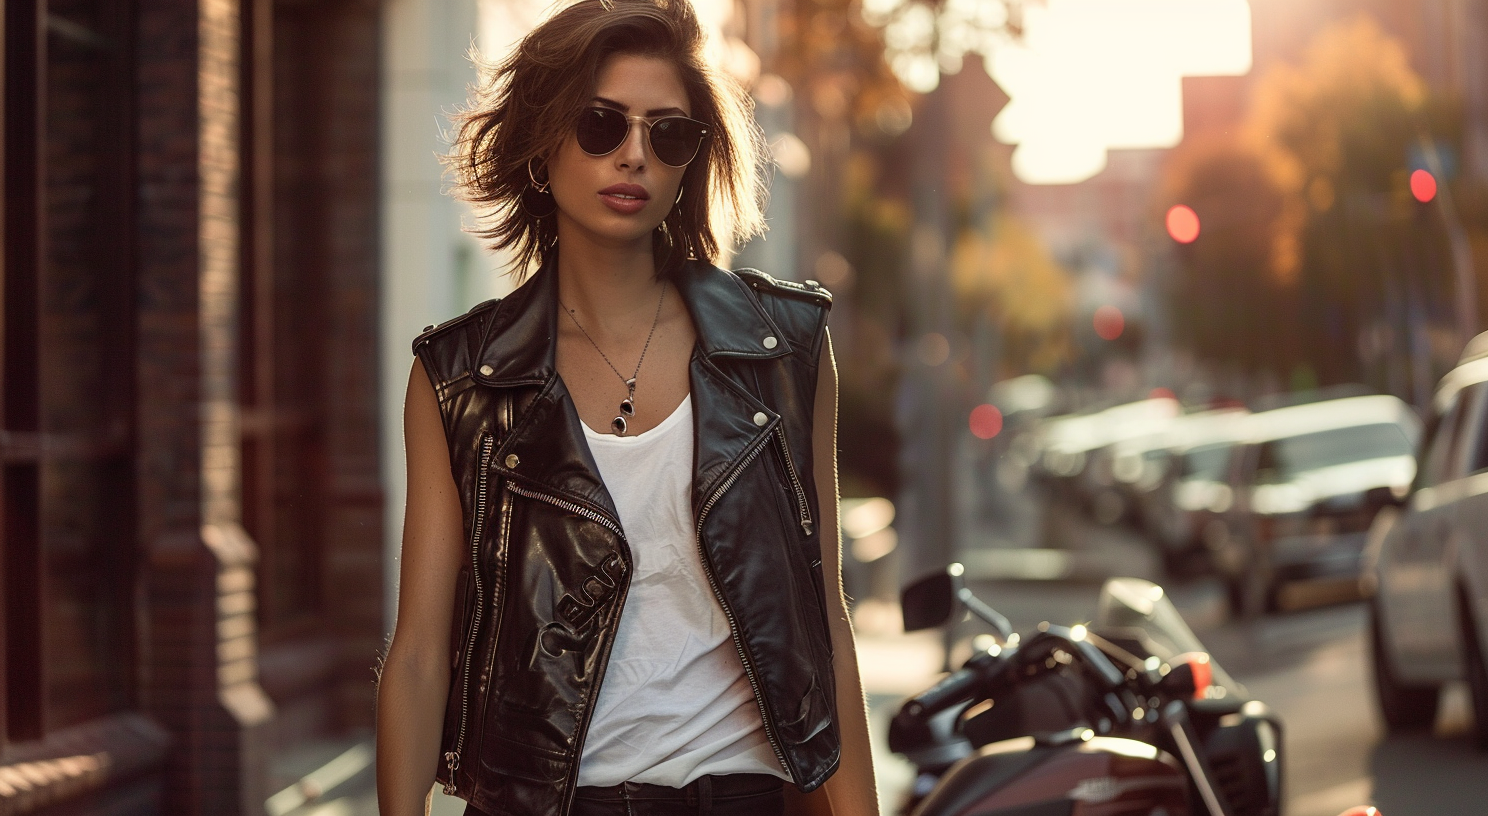 A Complete Collection Of Leather Vests For Women